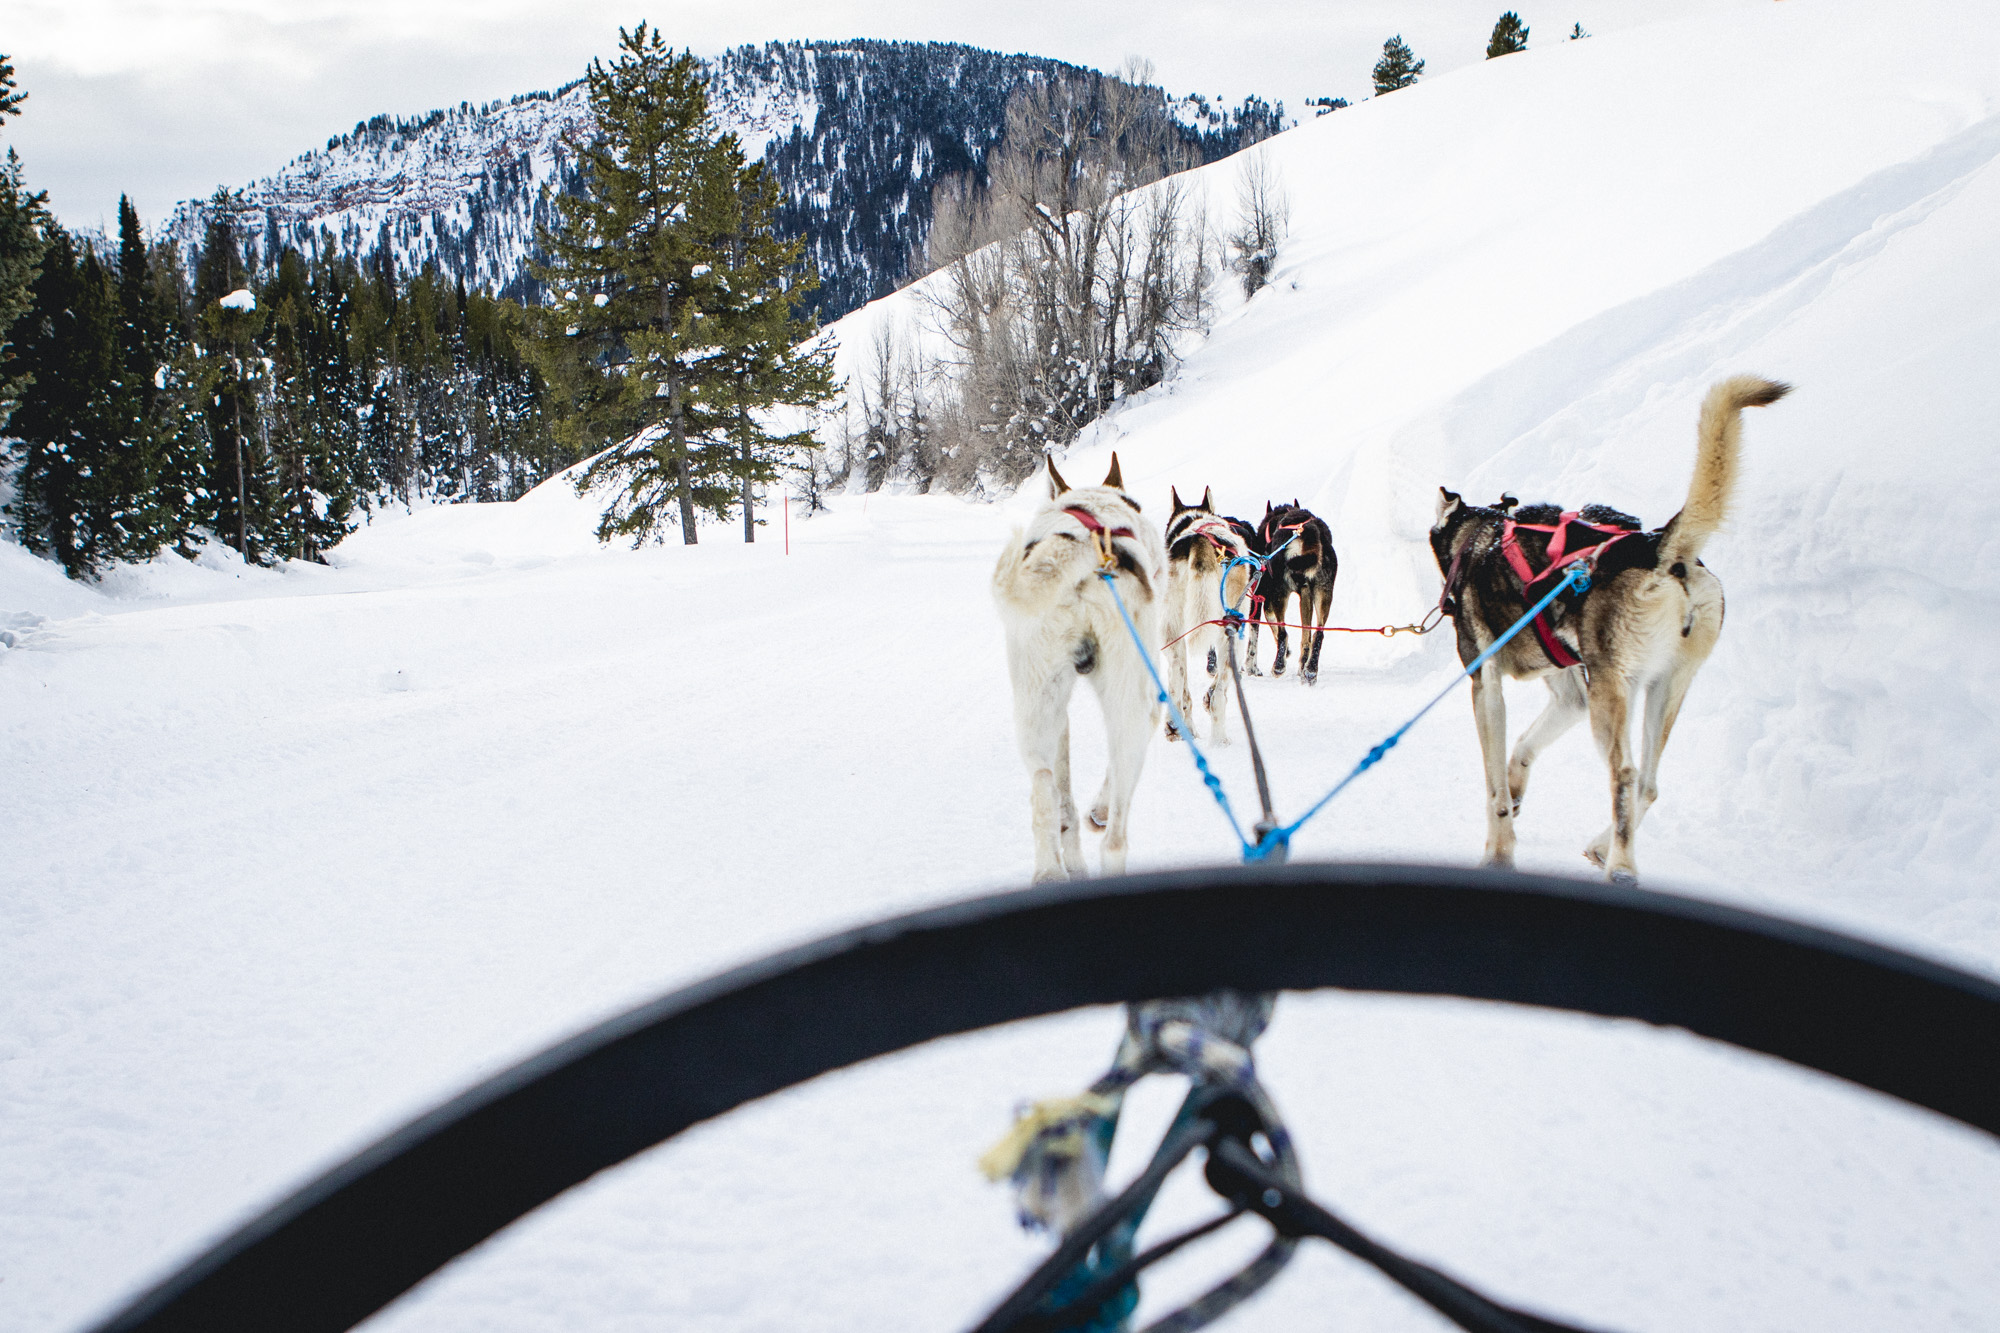 Dogs pull a cart through snowy mountains, providing a splendid view of snow-covered peaks.